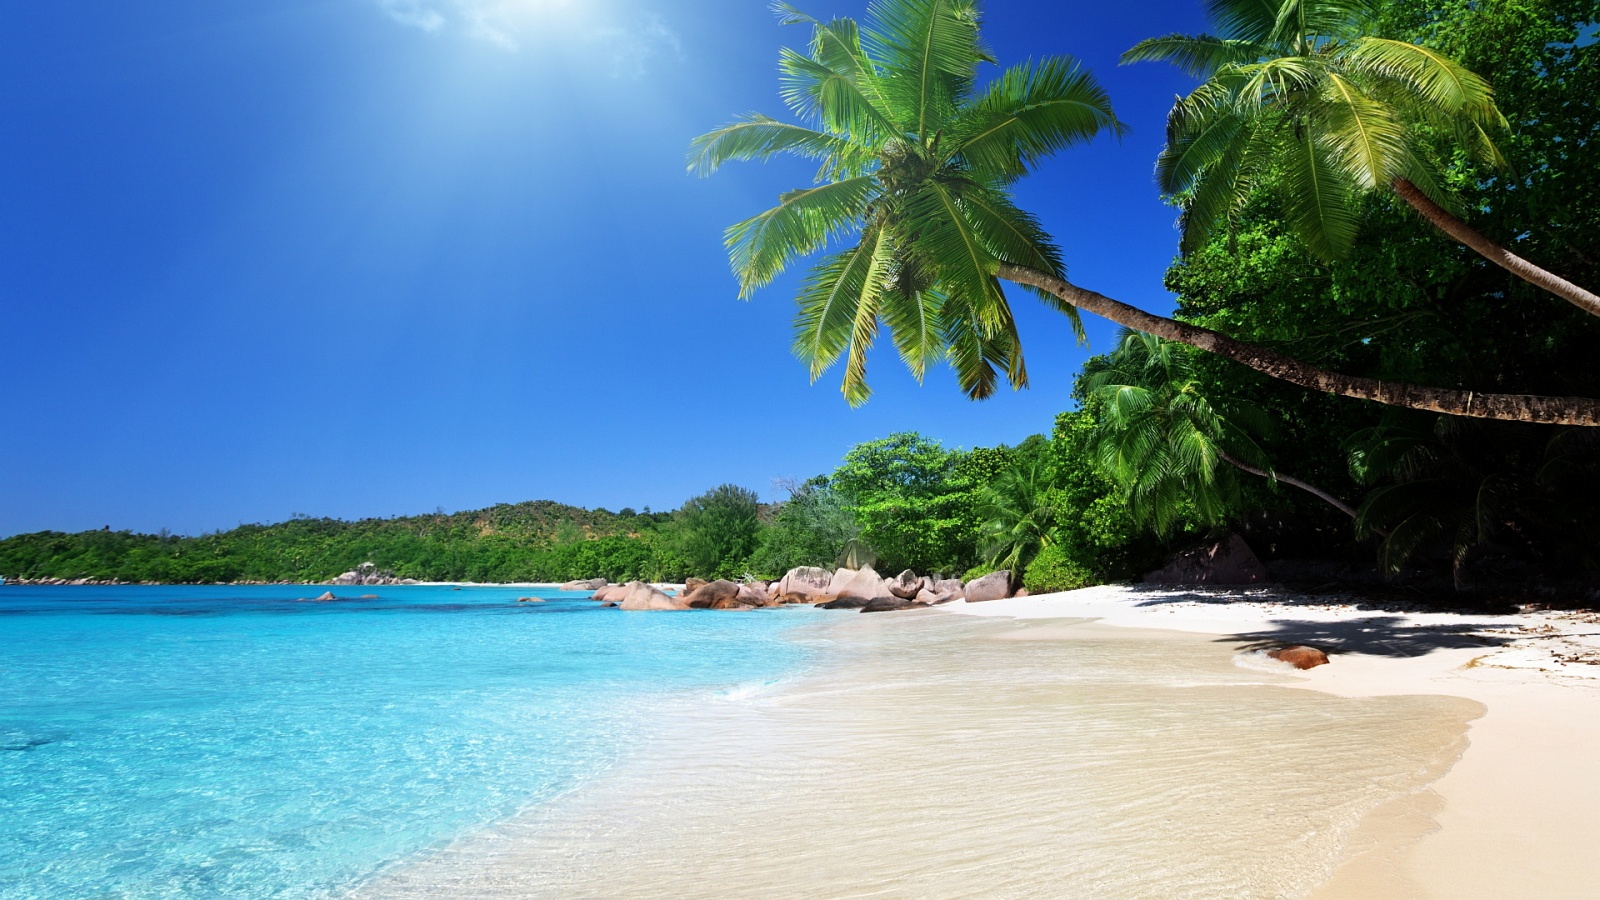 Download These 42 High Res Caribbean Wallpaper Backgrounds Here